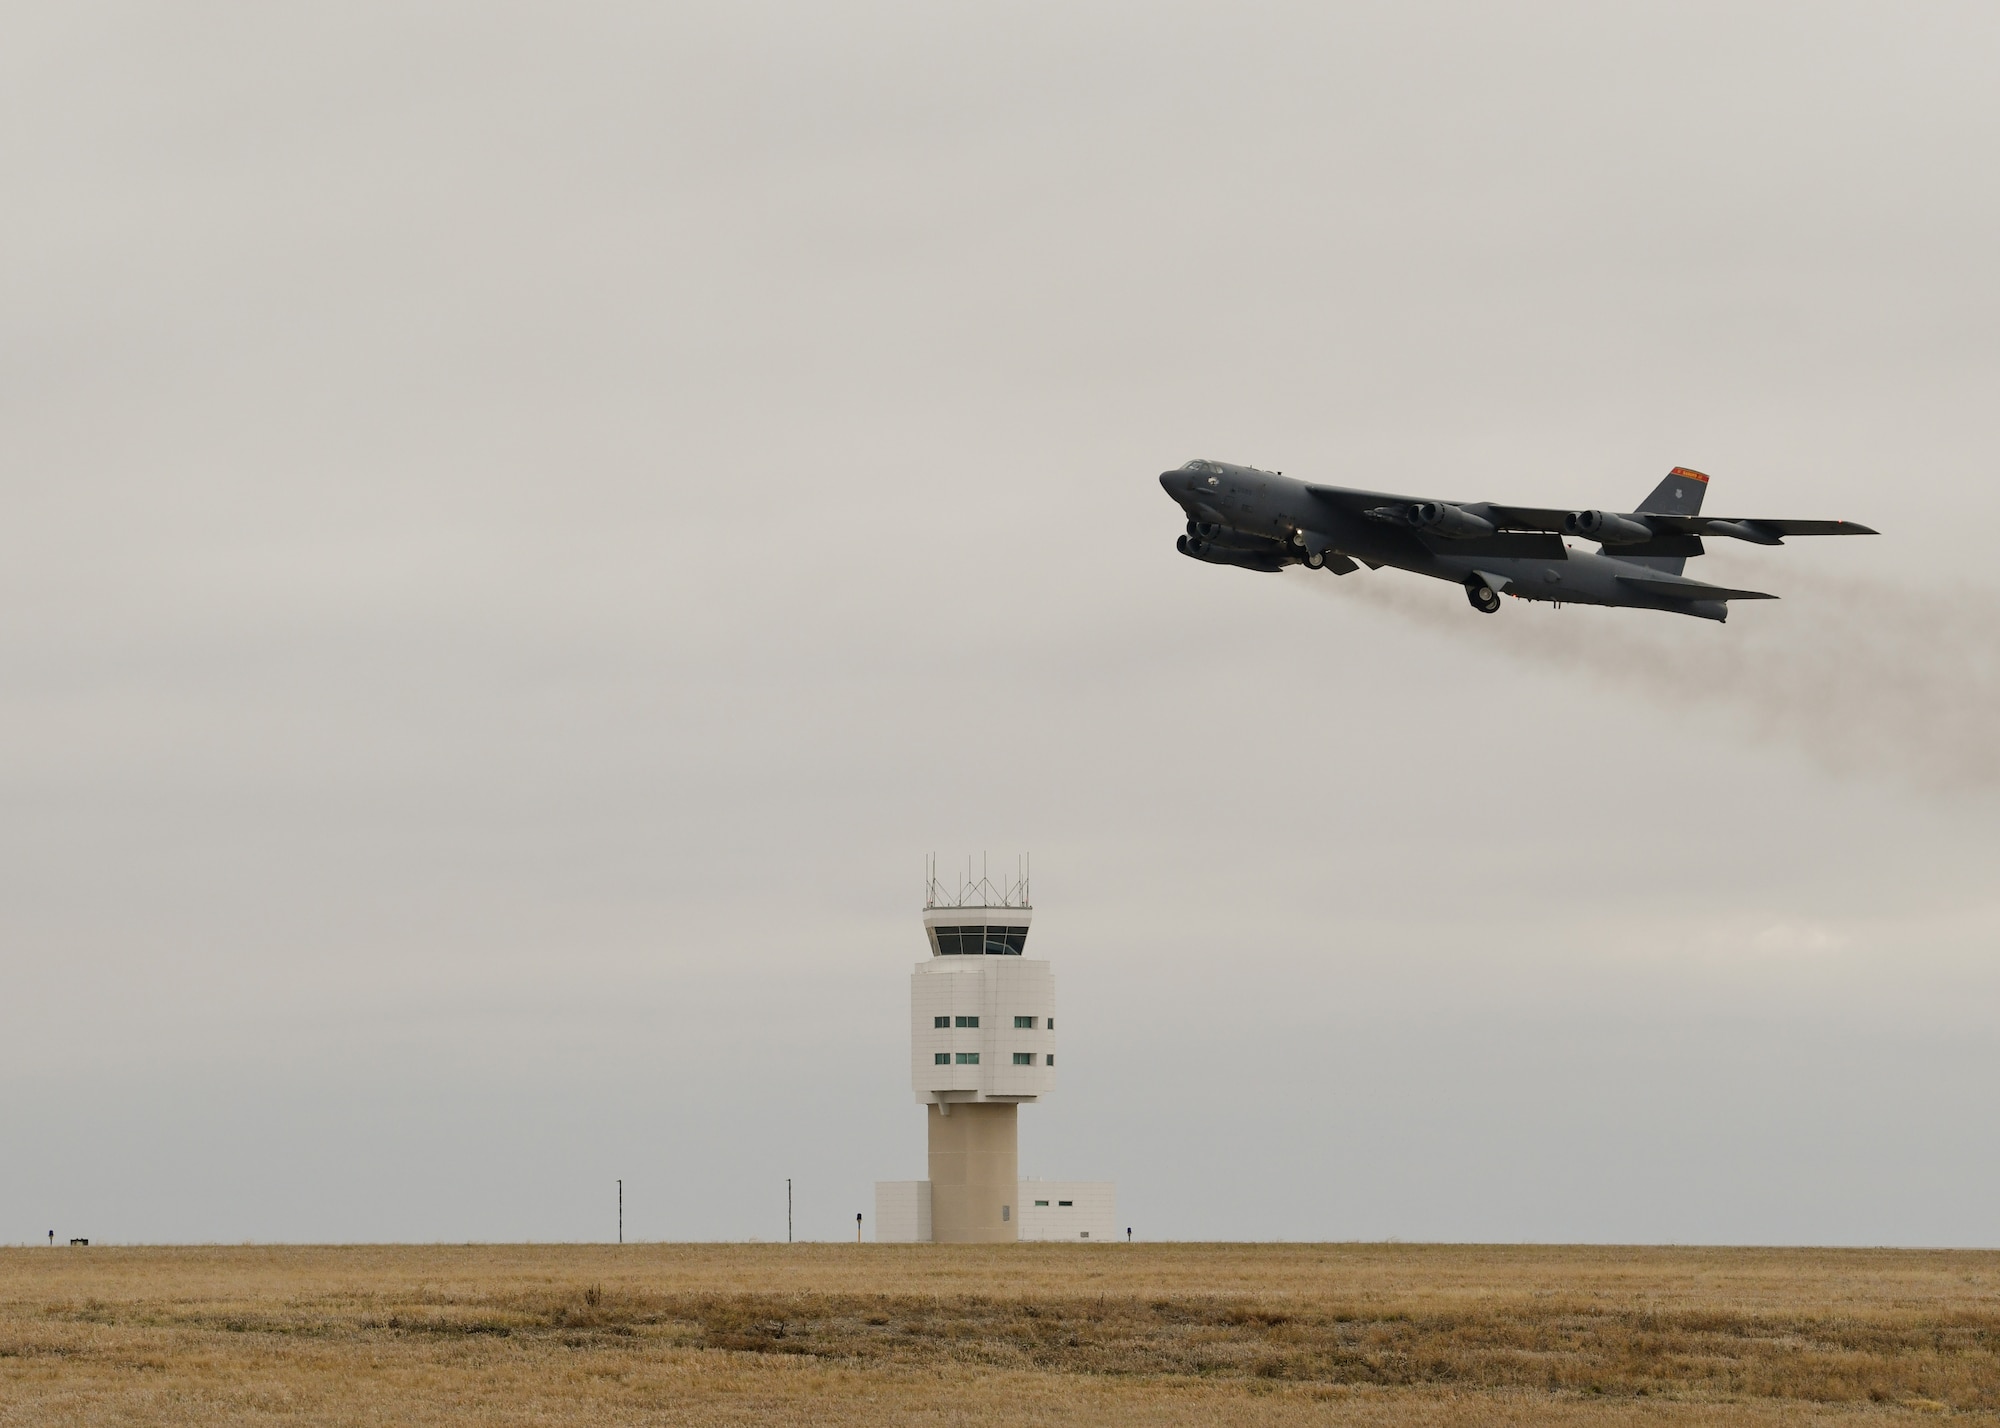 A B-52H Stratofortress takes off on April 25, 2021 at Minot Air Force Base, North Dakota. The bomber is one of two B-52 aircraft that arrived to Al Udeid Air Base, Qatar, April 26, joining two additional B-52 bombers that arrived April 23. The bombers are deployed to protect U.S. and coalition forces as they conduct drawdown operations from Afghanistan. U.S. Central Command is committed to providing the necessary force protection to ensure the drawdown is conducted in a safe and orderly manner. (U.S. Air Force photo by Airman 1st Class Evan J. Lichtenhan)